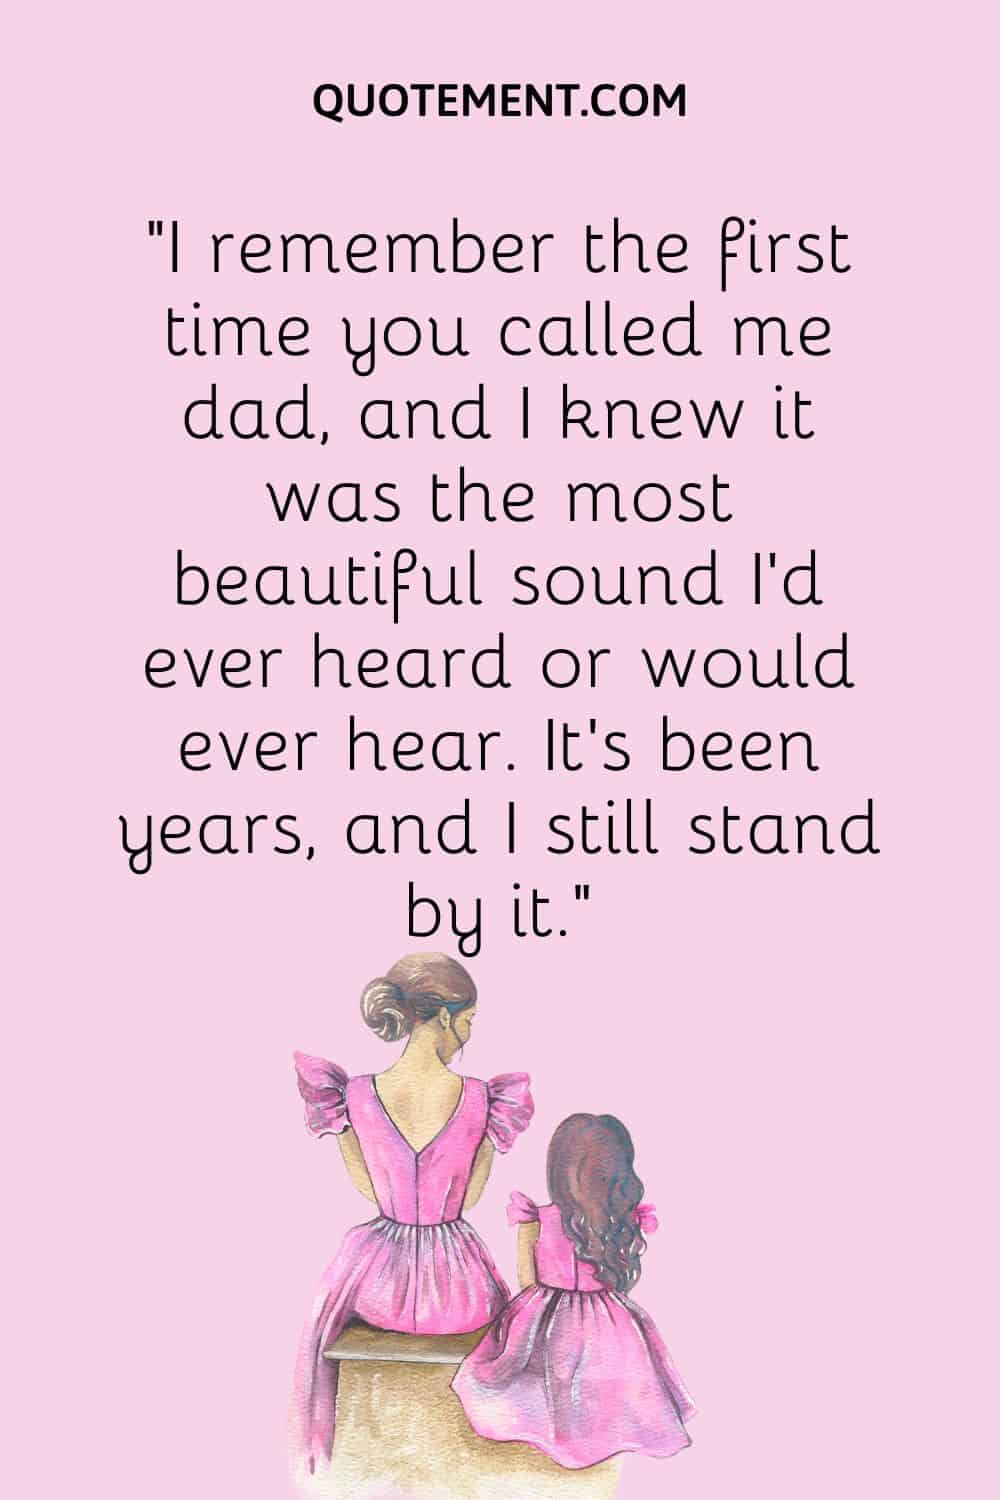 “I remember the first time you called me dad, and I knew it was the most beautiful sound I’d ever heard or would ever hear. It’s been years, and I still stand by it.”